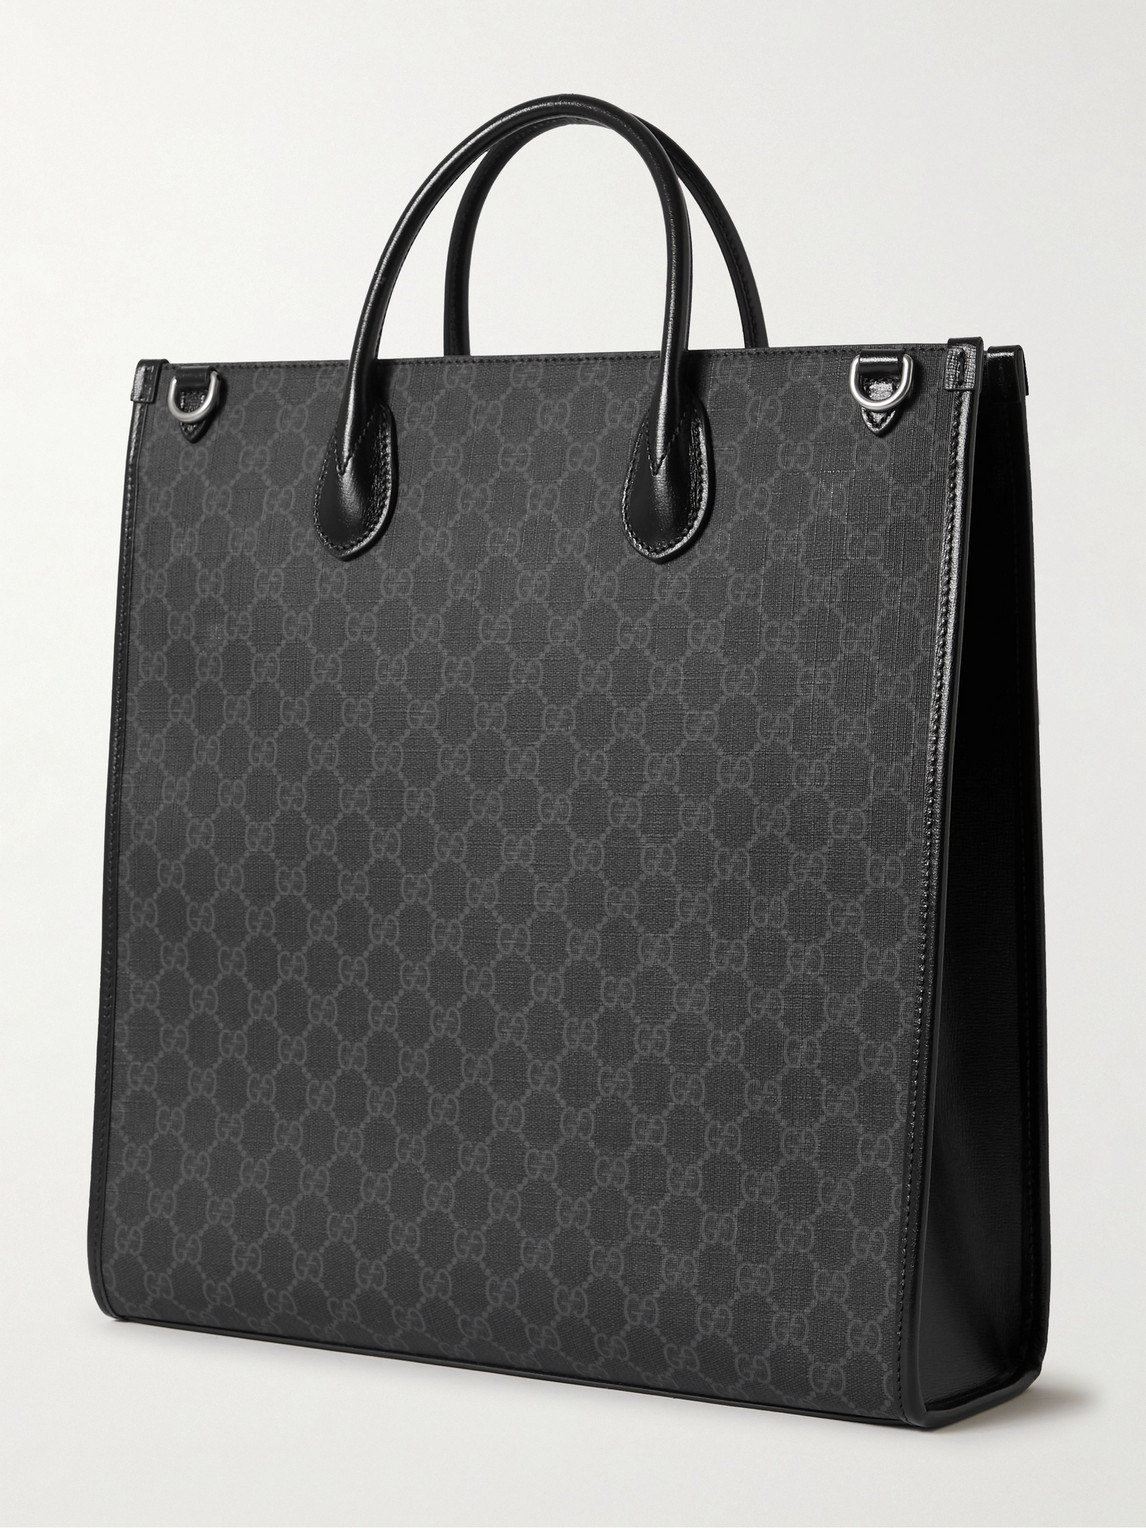 GUCCI LEATHER-TRIMMED MONOGRAMMED COATED-CANVAS TOTE BAG 